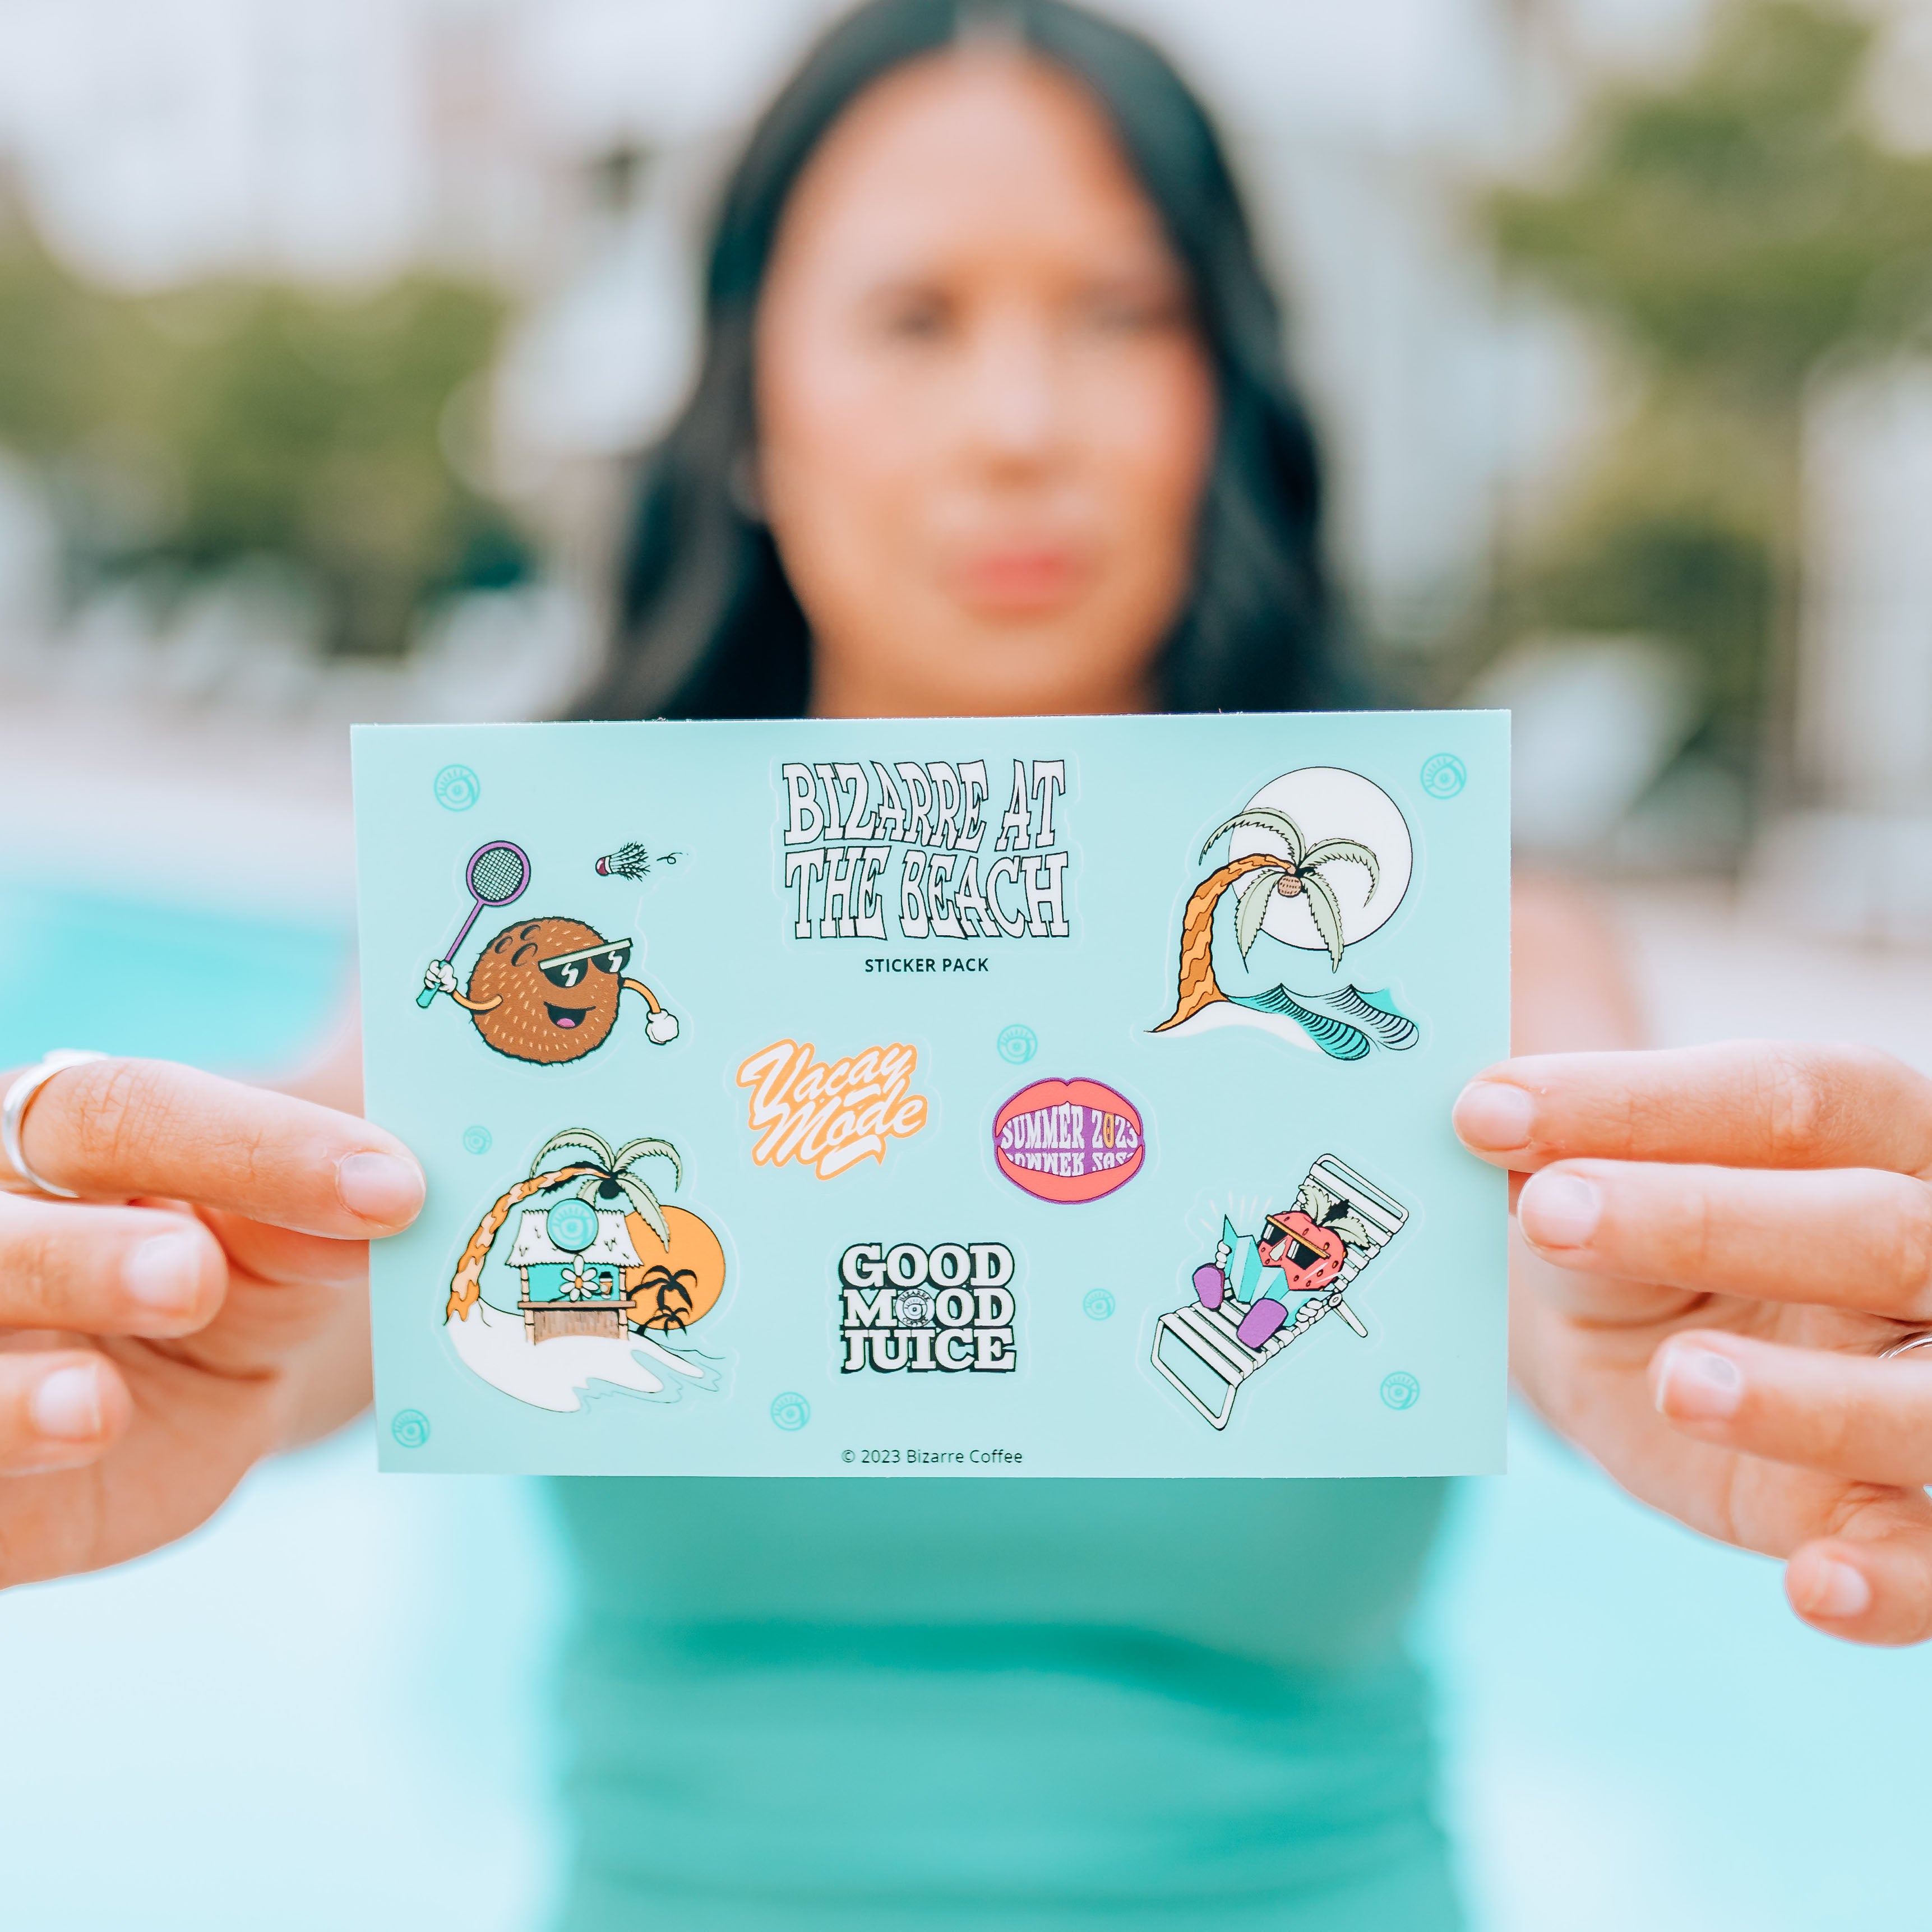 A sticker sheet with beach-related stickers.